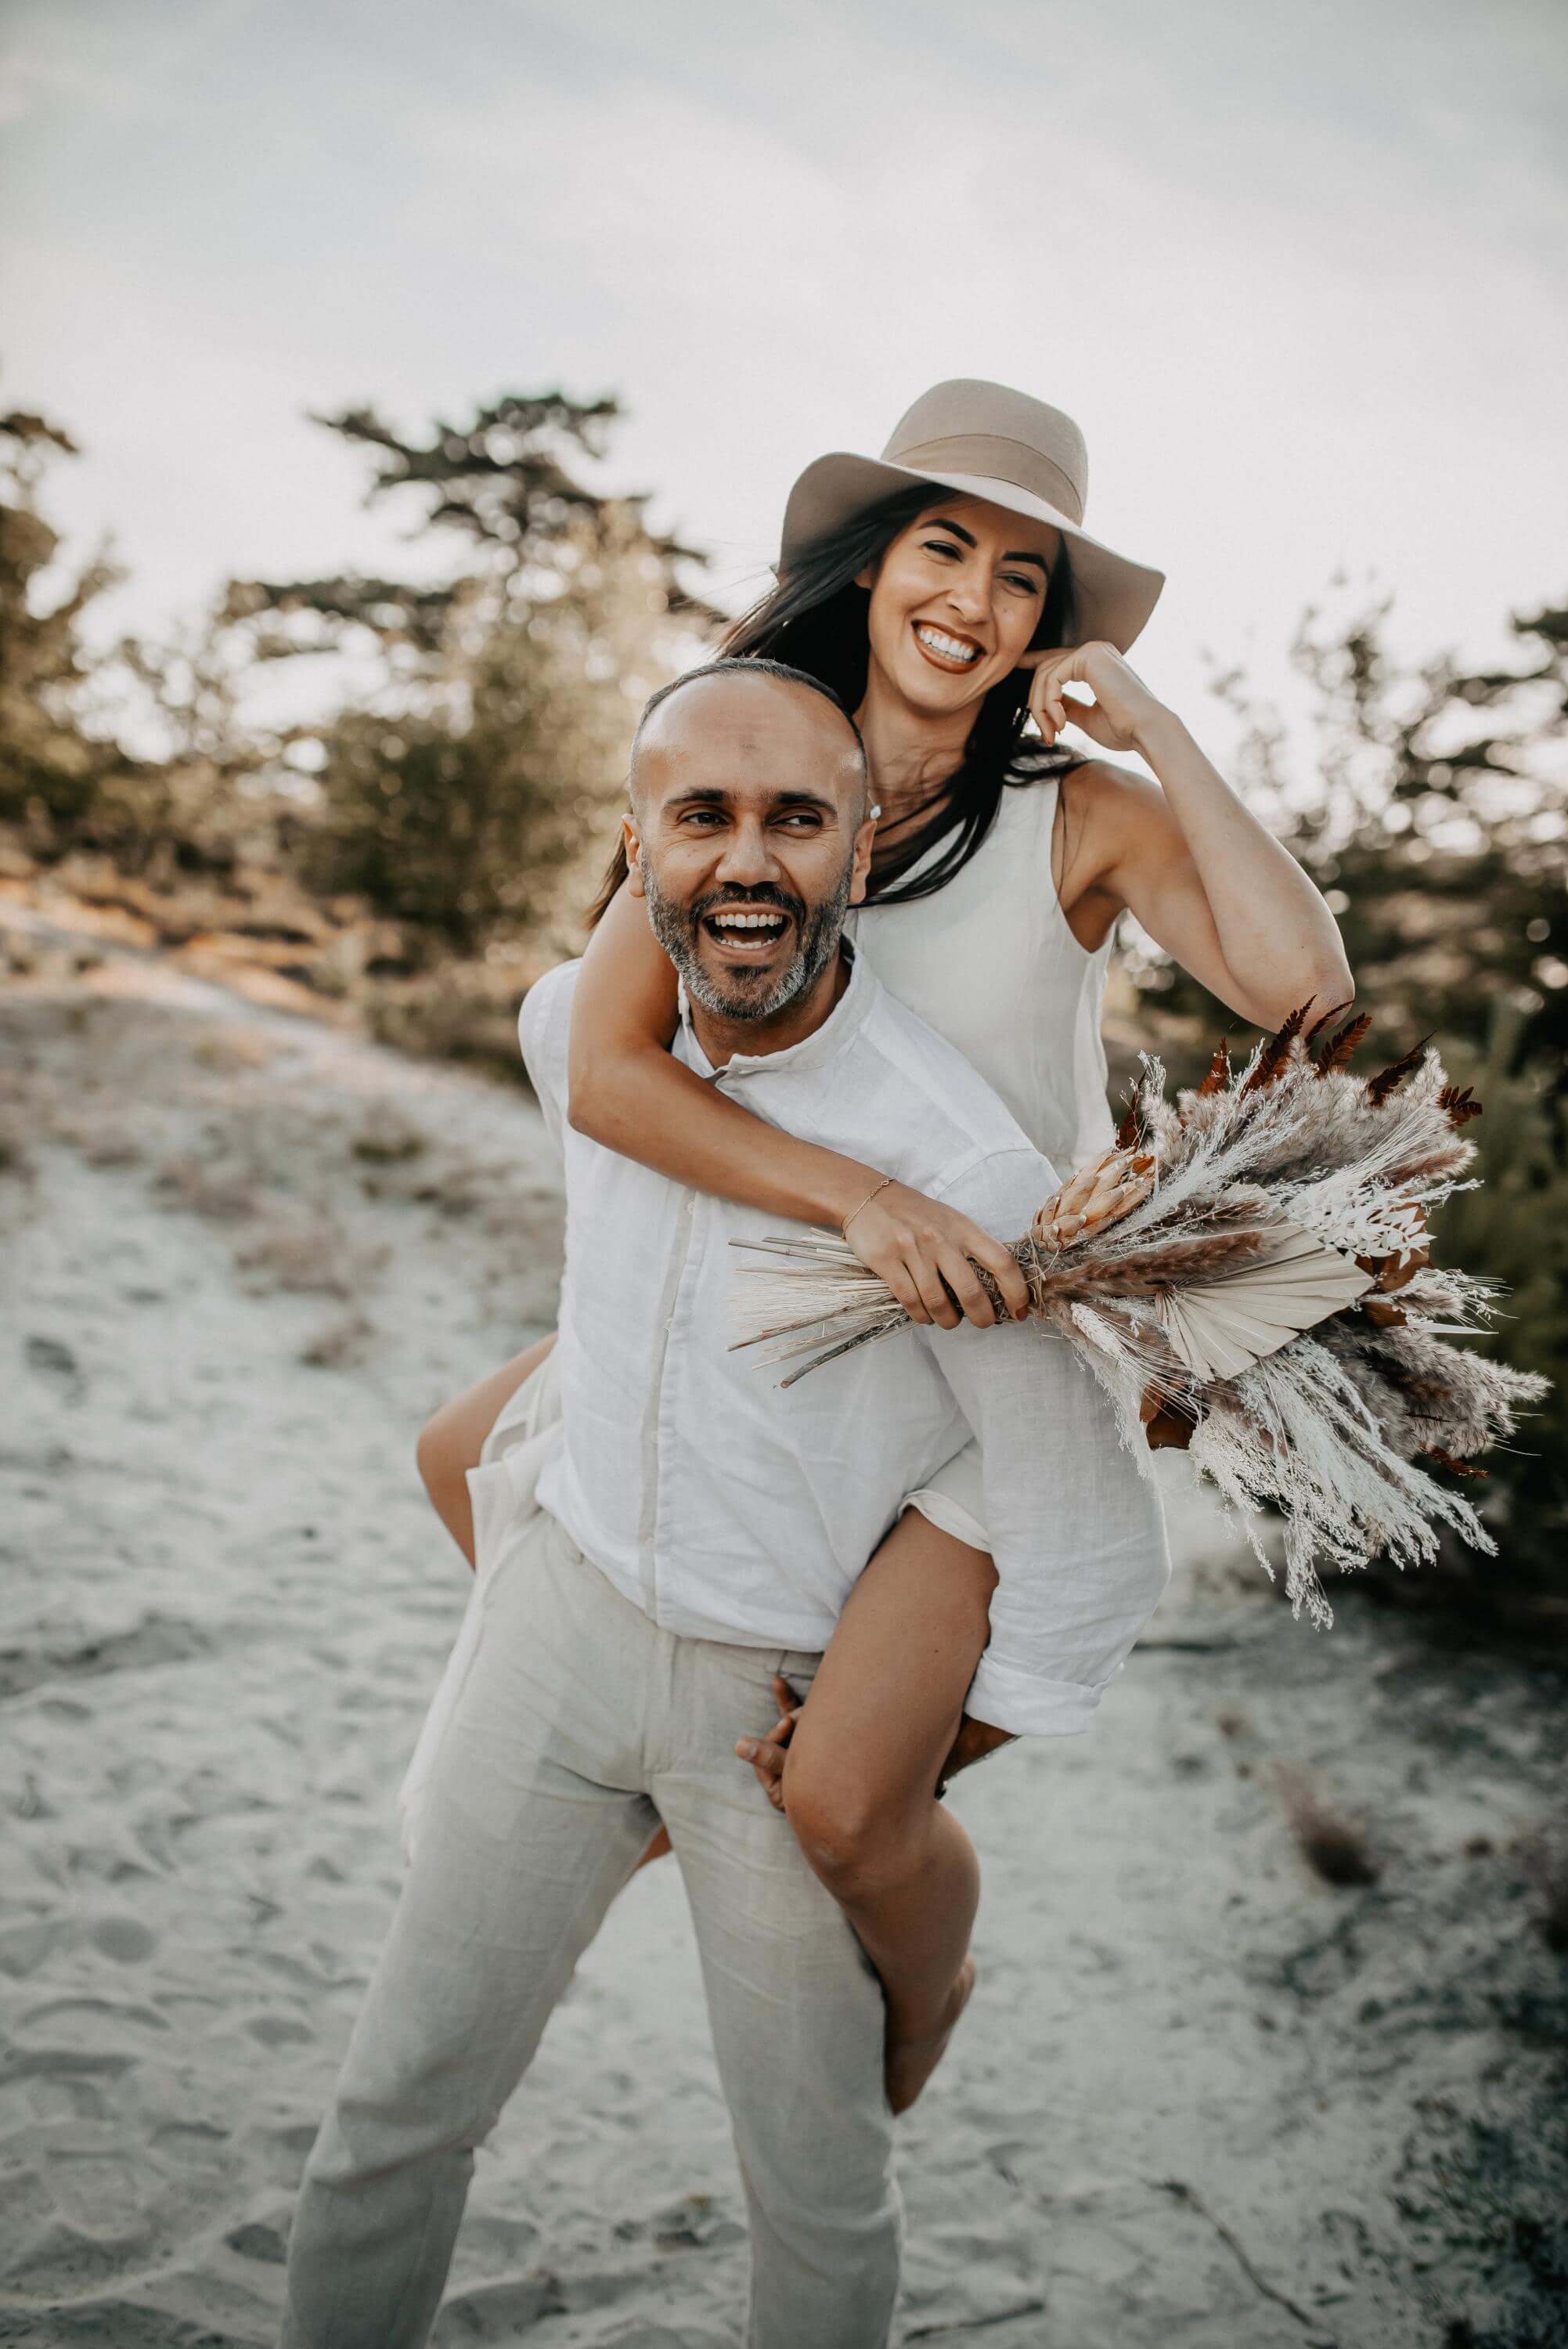 In a relaxed mood, a man carries his wife in a cowboy hat piggyback on his back while they both laugh in the sandy heathland.